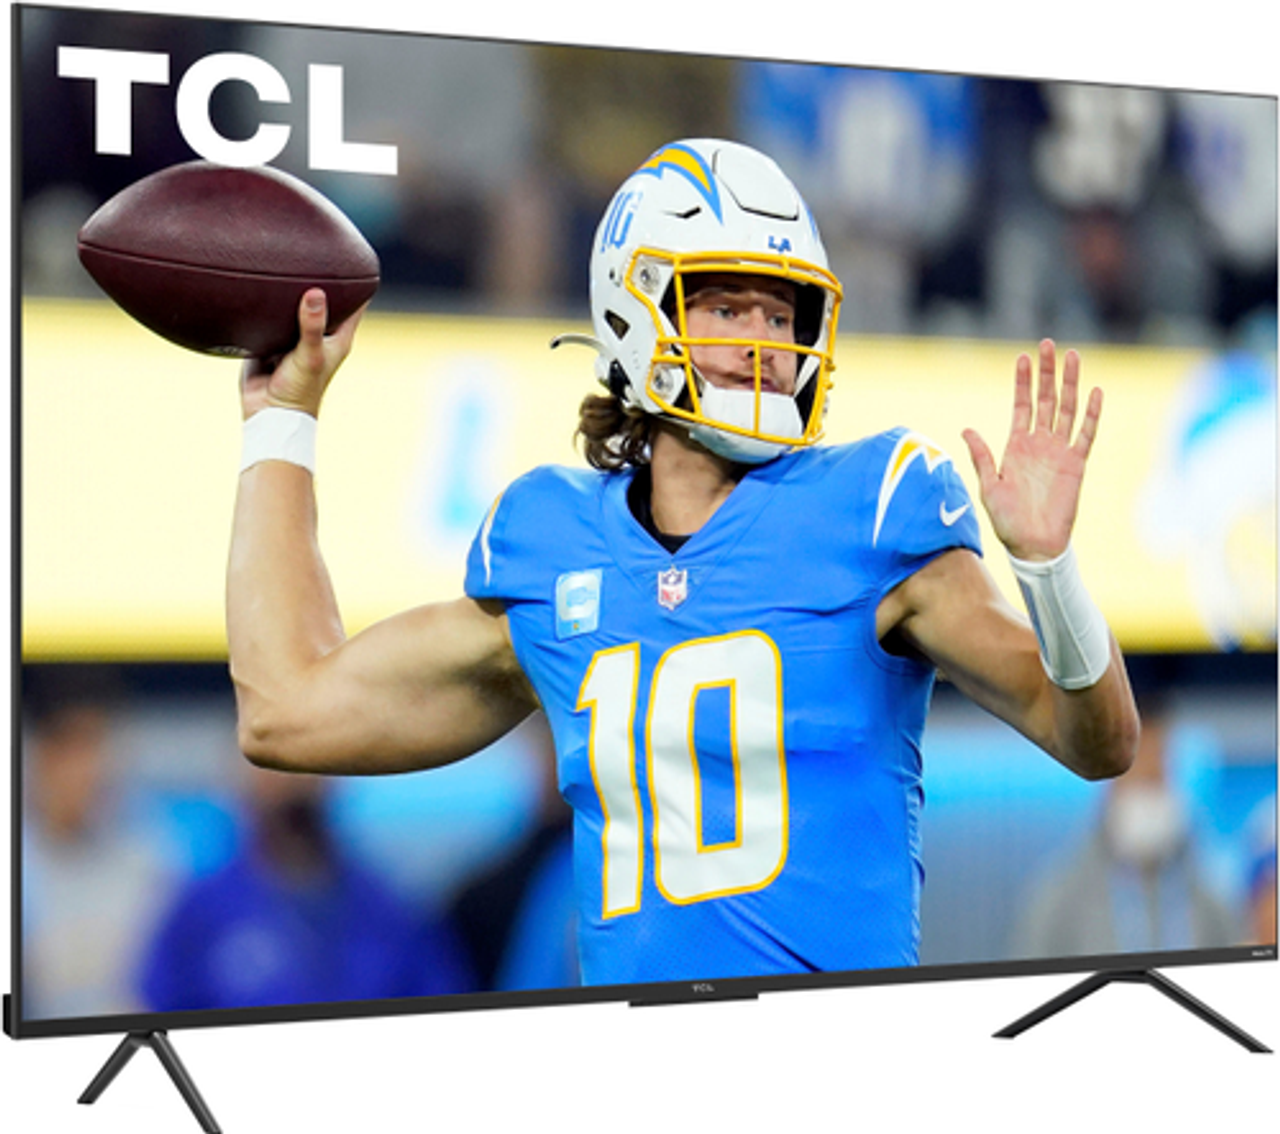 TCL - 85" S Class 4K UHD HDR LED Smart TV with Google TV